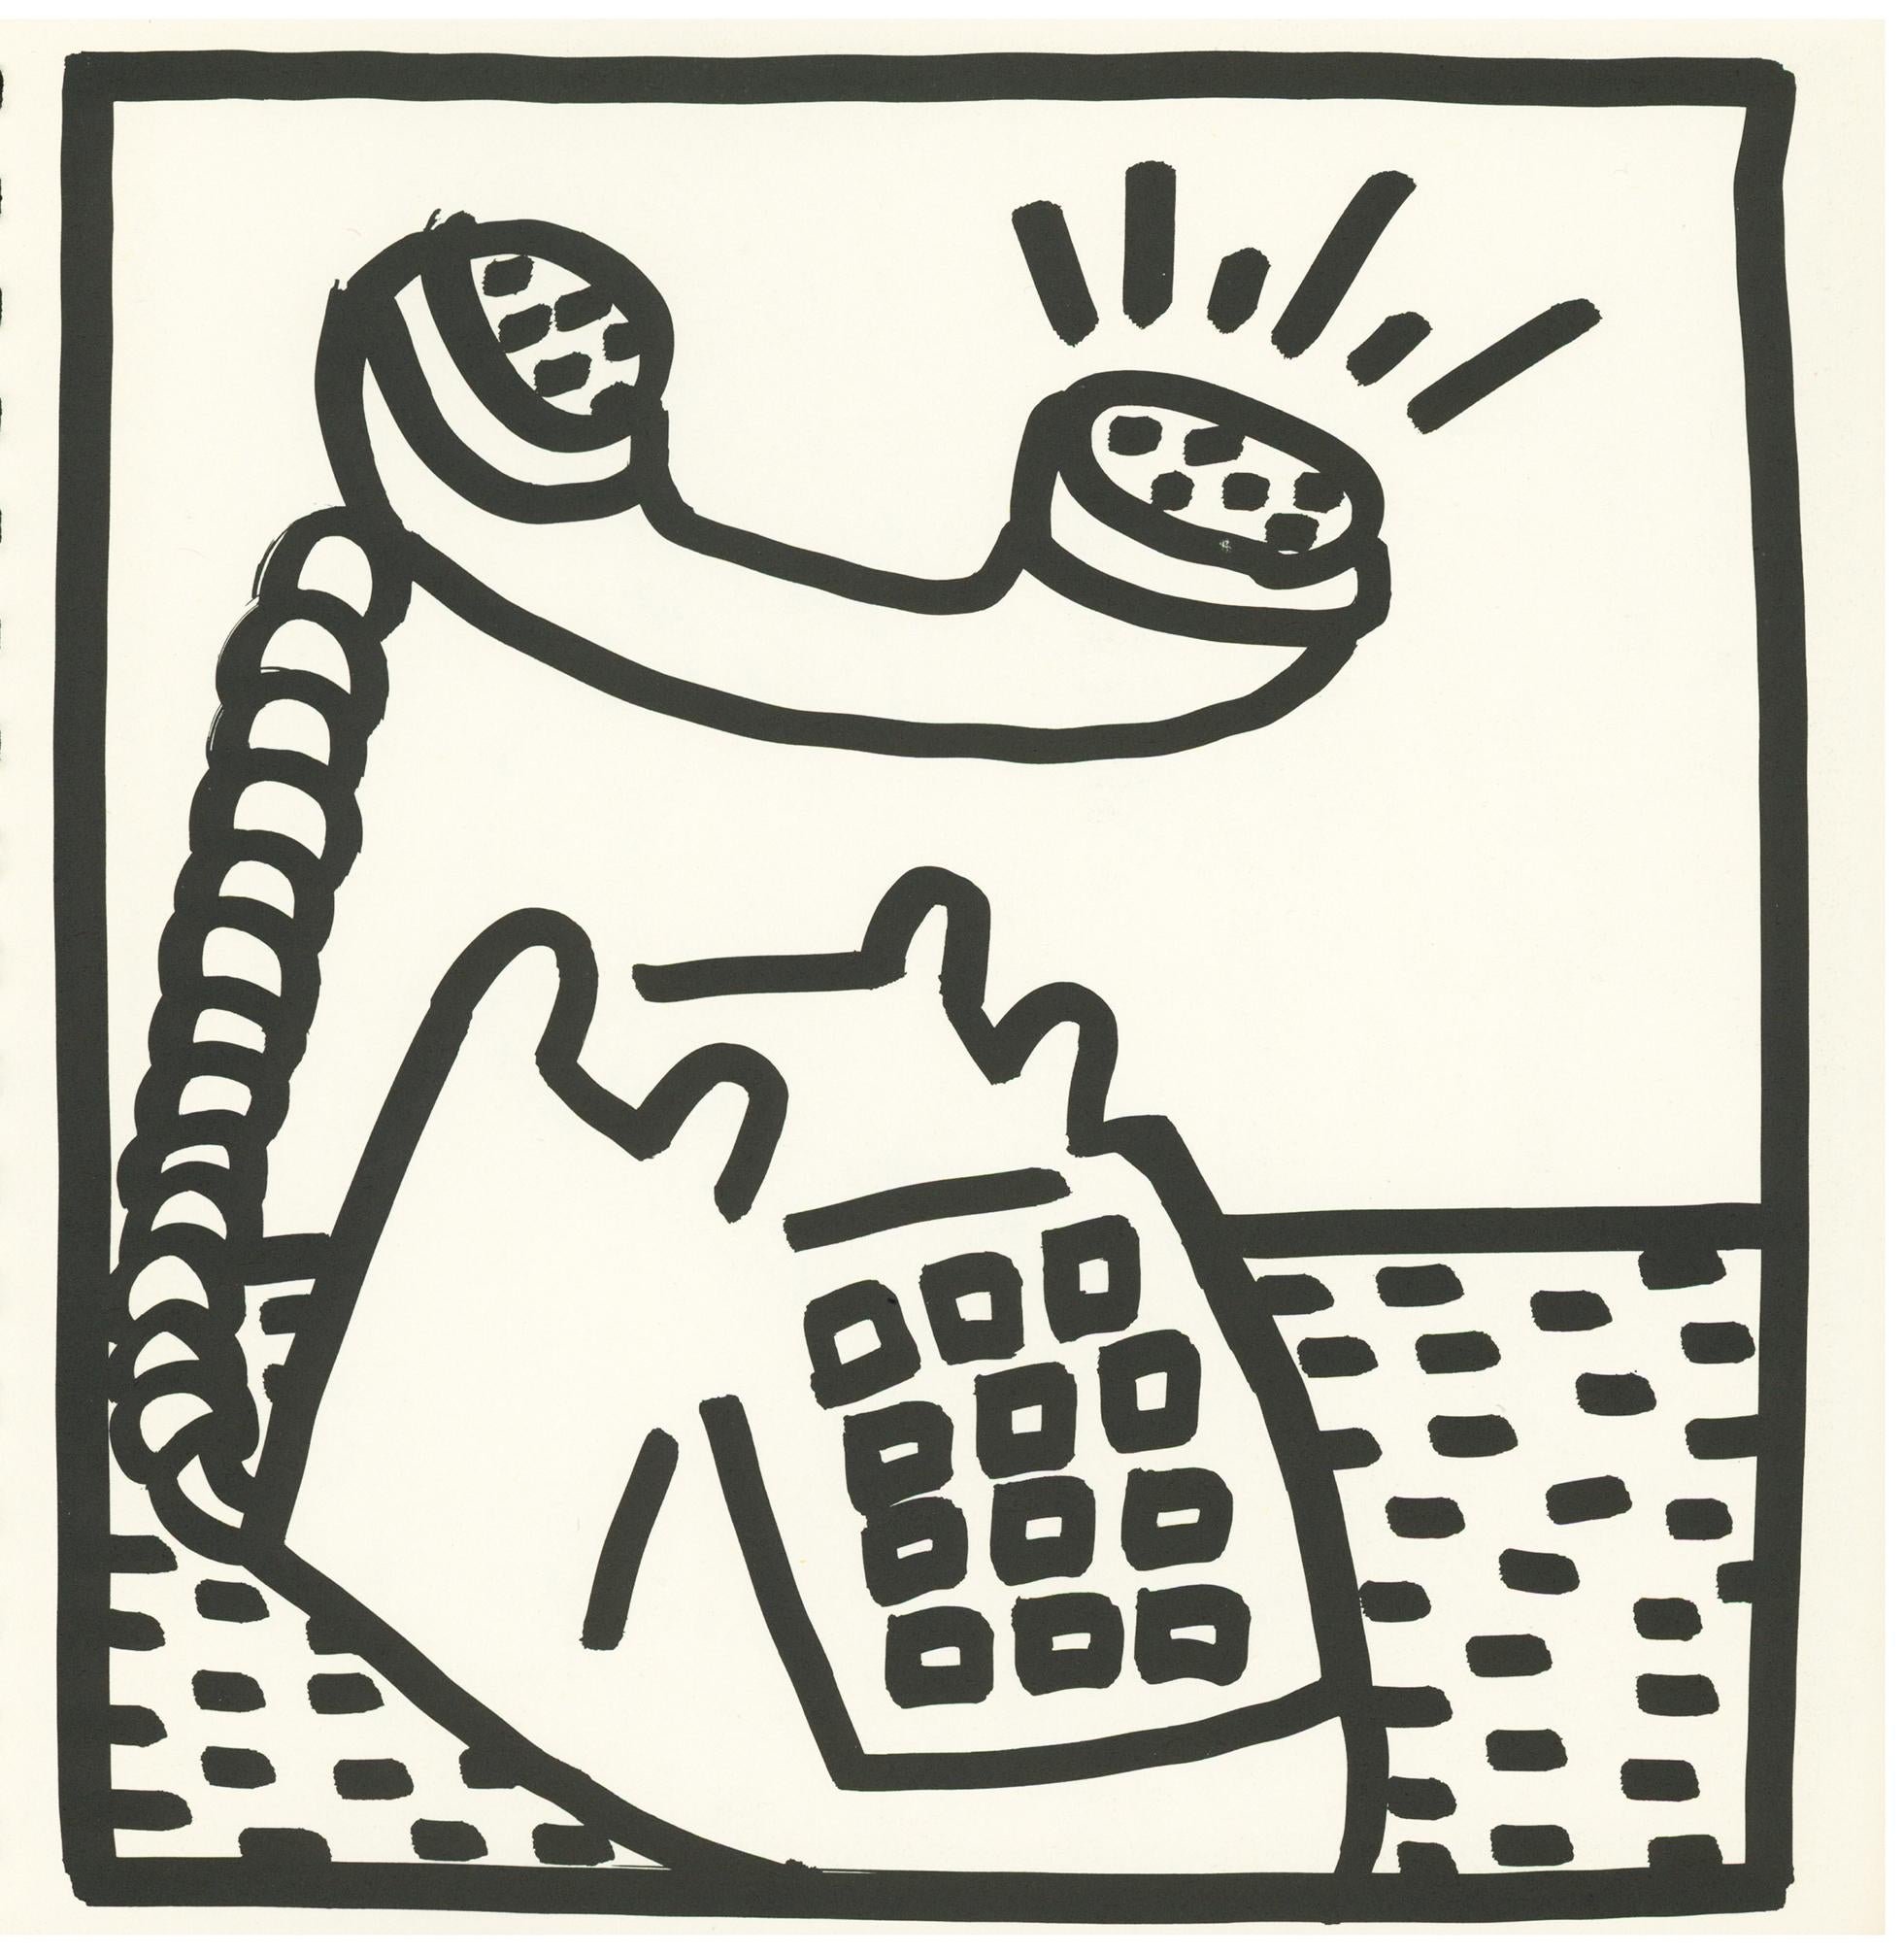 Keith Haring (untitled) Telephone lithograph 1982 (Keith Haring 1982)  - Print by (after) Keith Haring